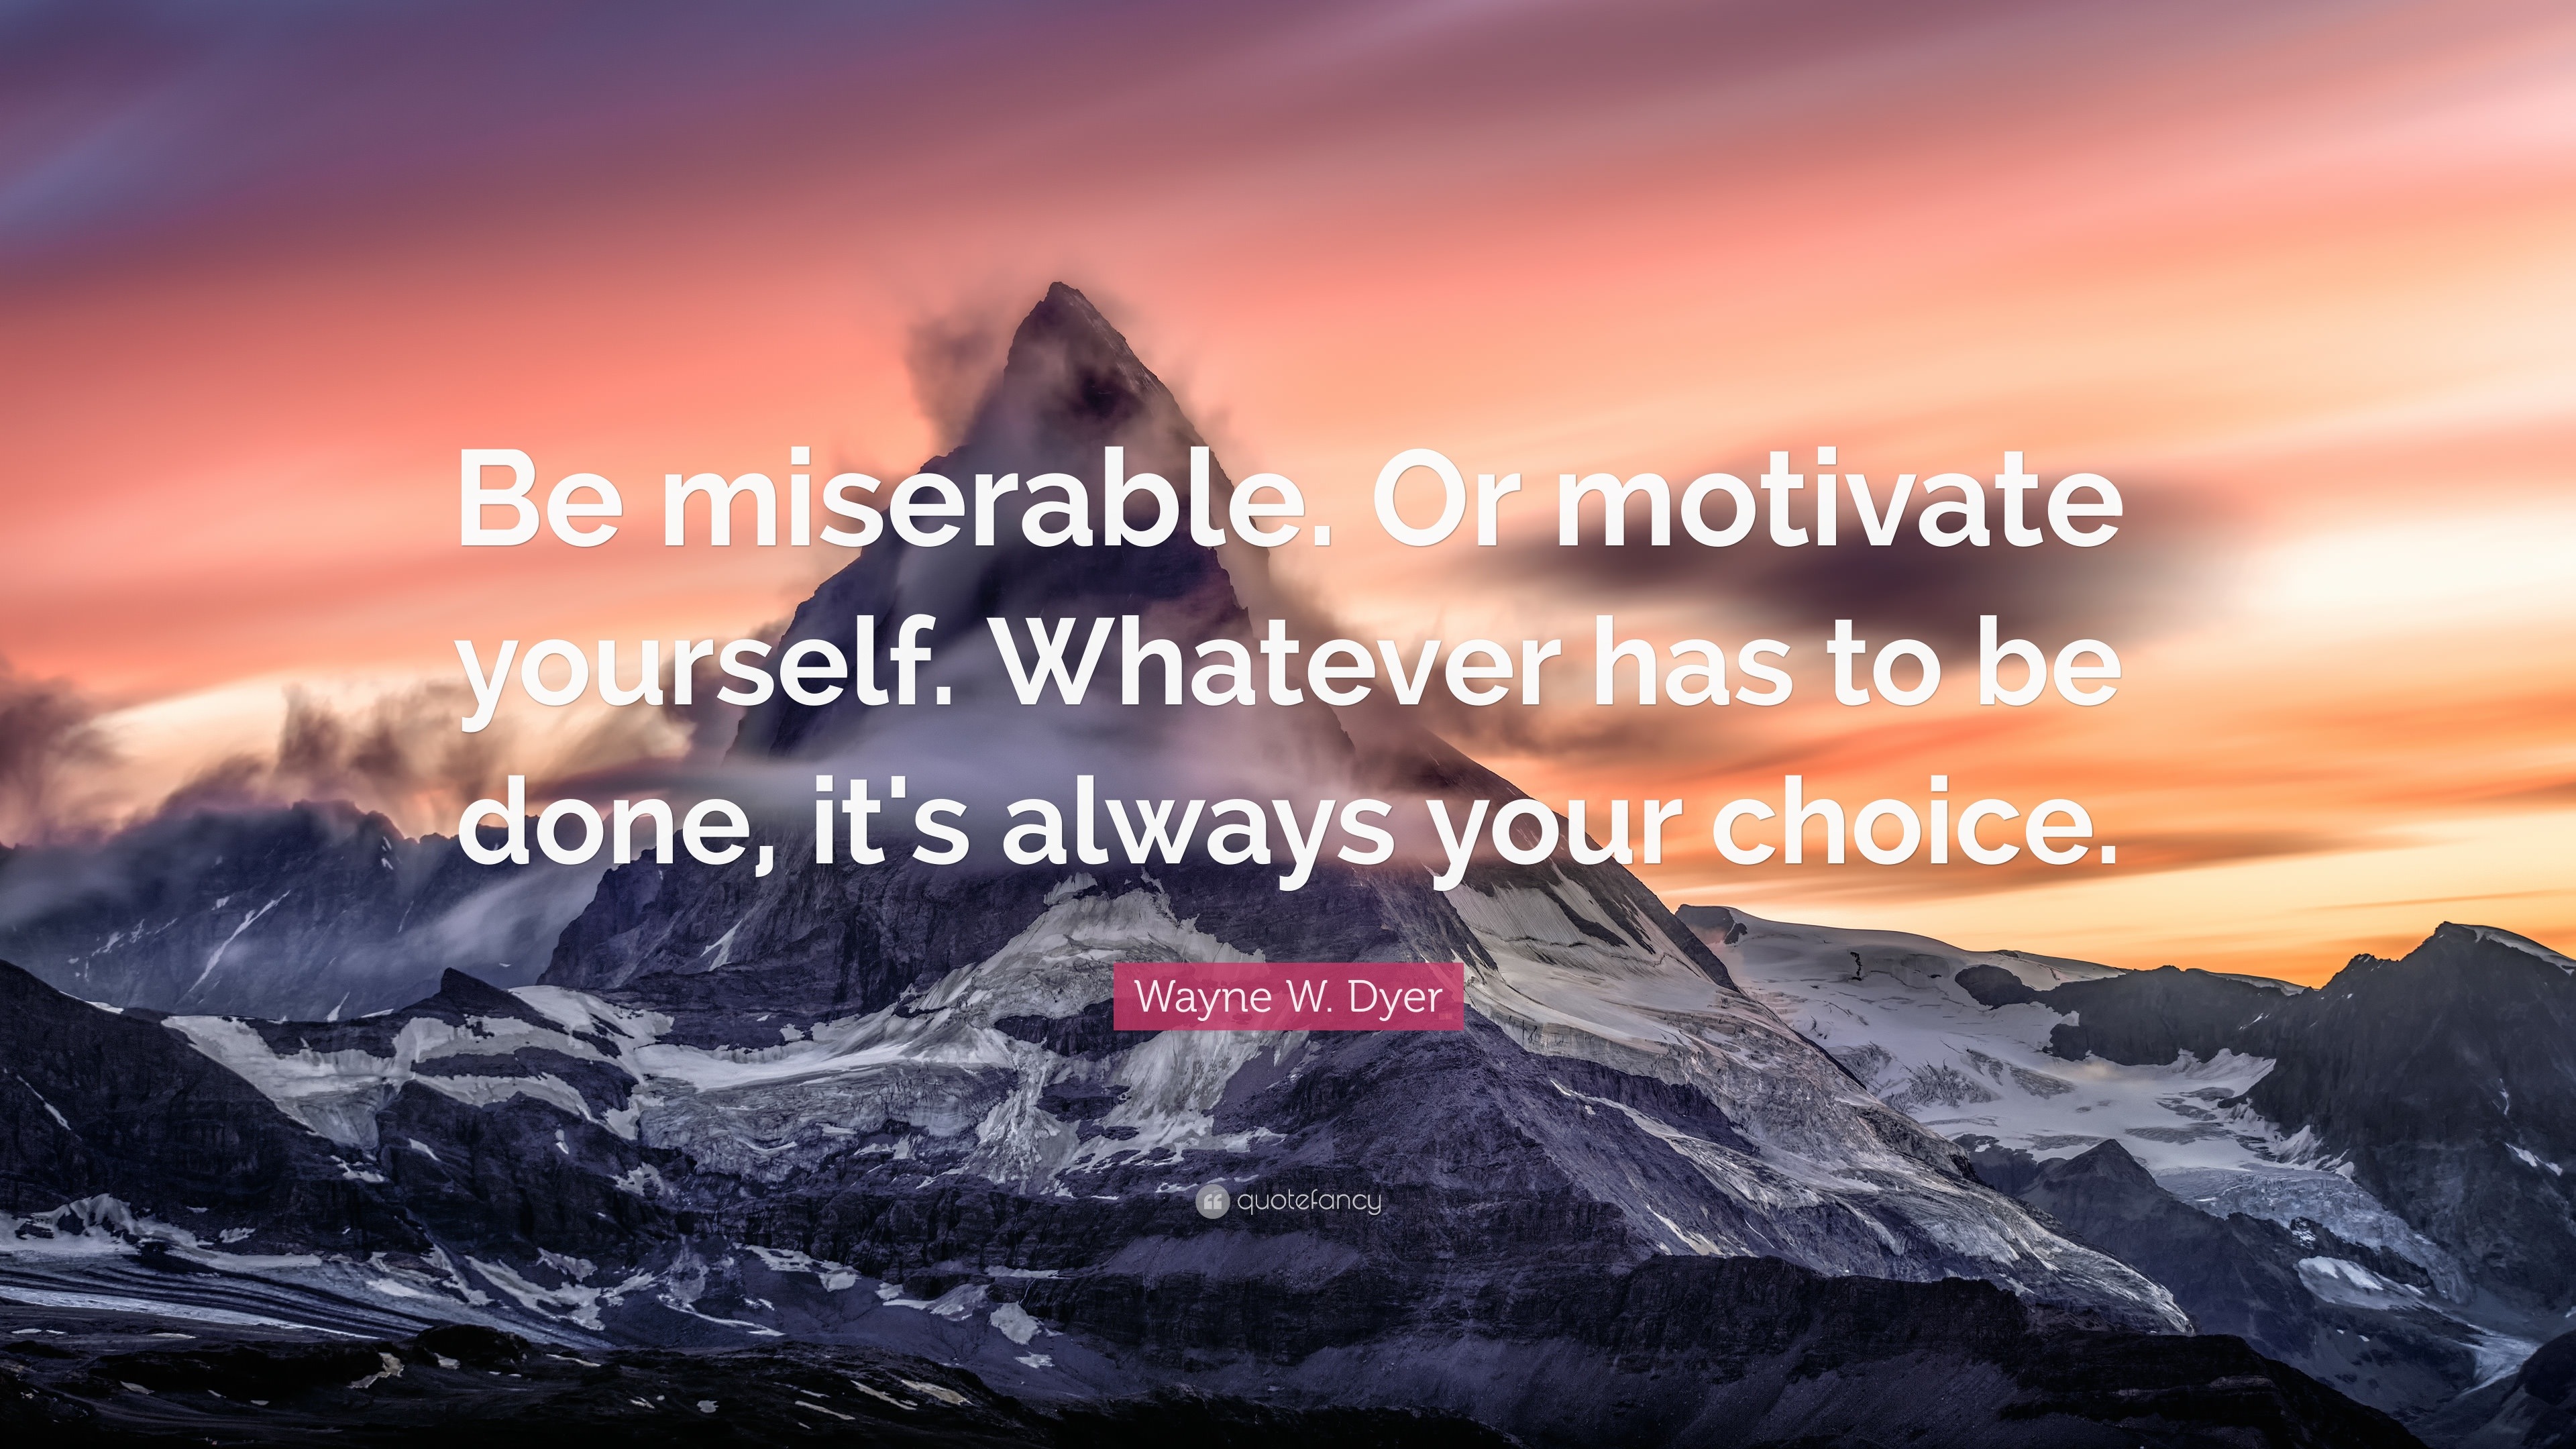 Wayne W. Dyer Quote: “Be miserable. Or motivate yourself. Whatever has